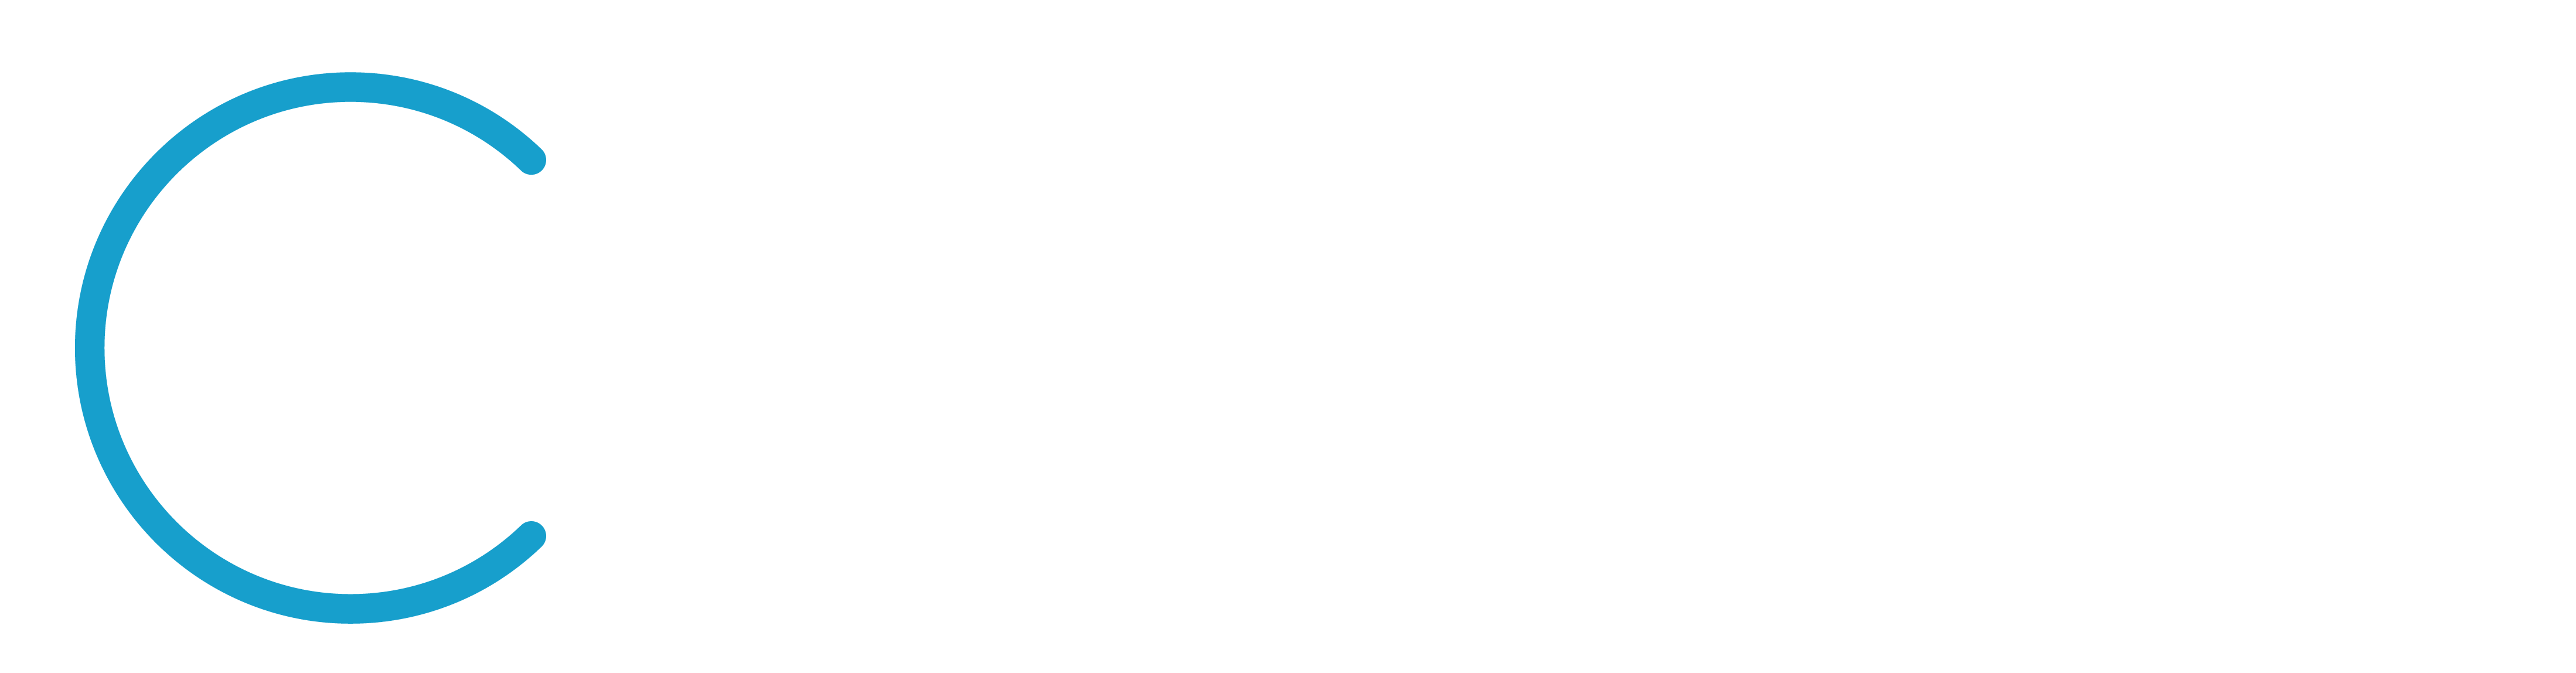 Chatham Capital logo white with light blue accents